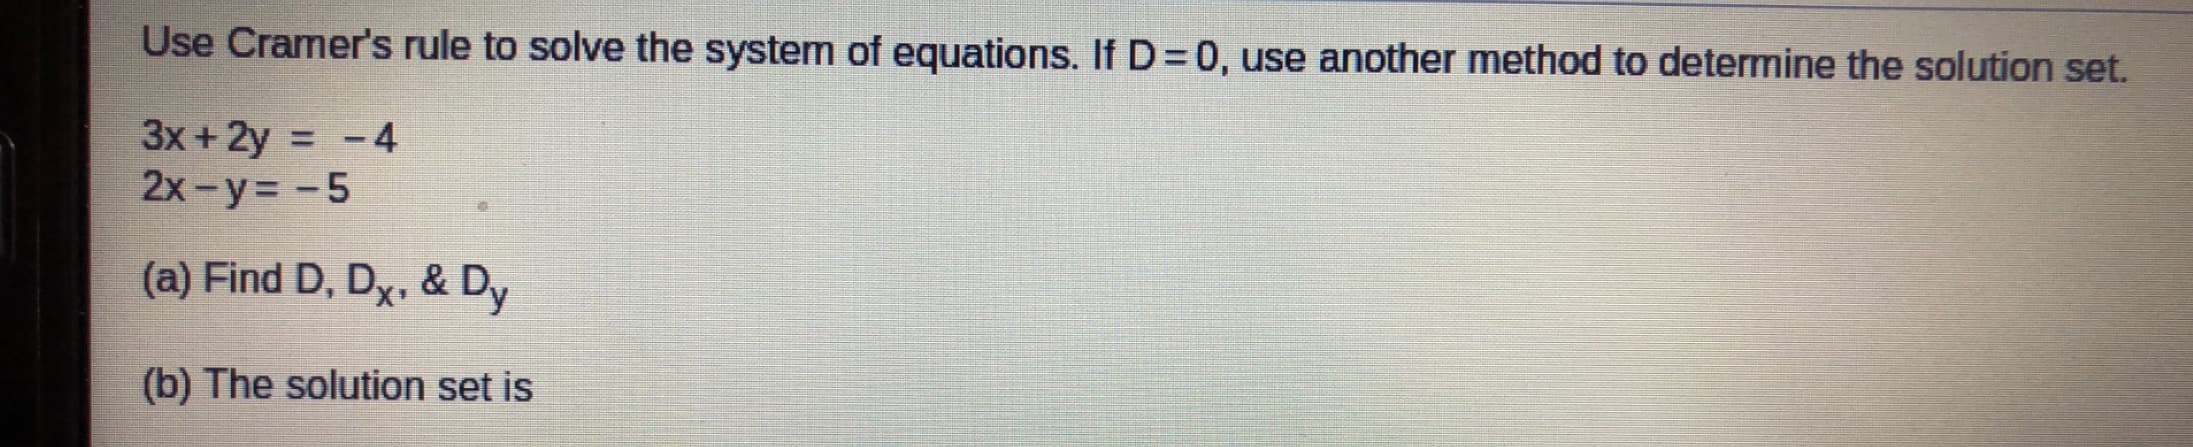 Use Cramer's rule to solve the system of equations. If D=0, use another method to determine the solution set.
3x + 2y = -4
2x-y= -5
%3D
(a) Find D, Dx, & Dy
(b) The solution set is
